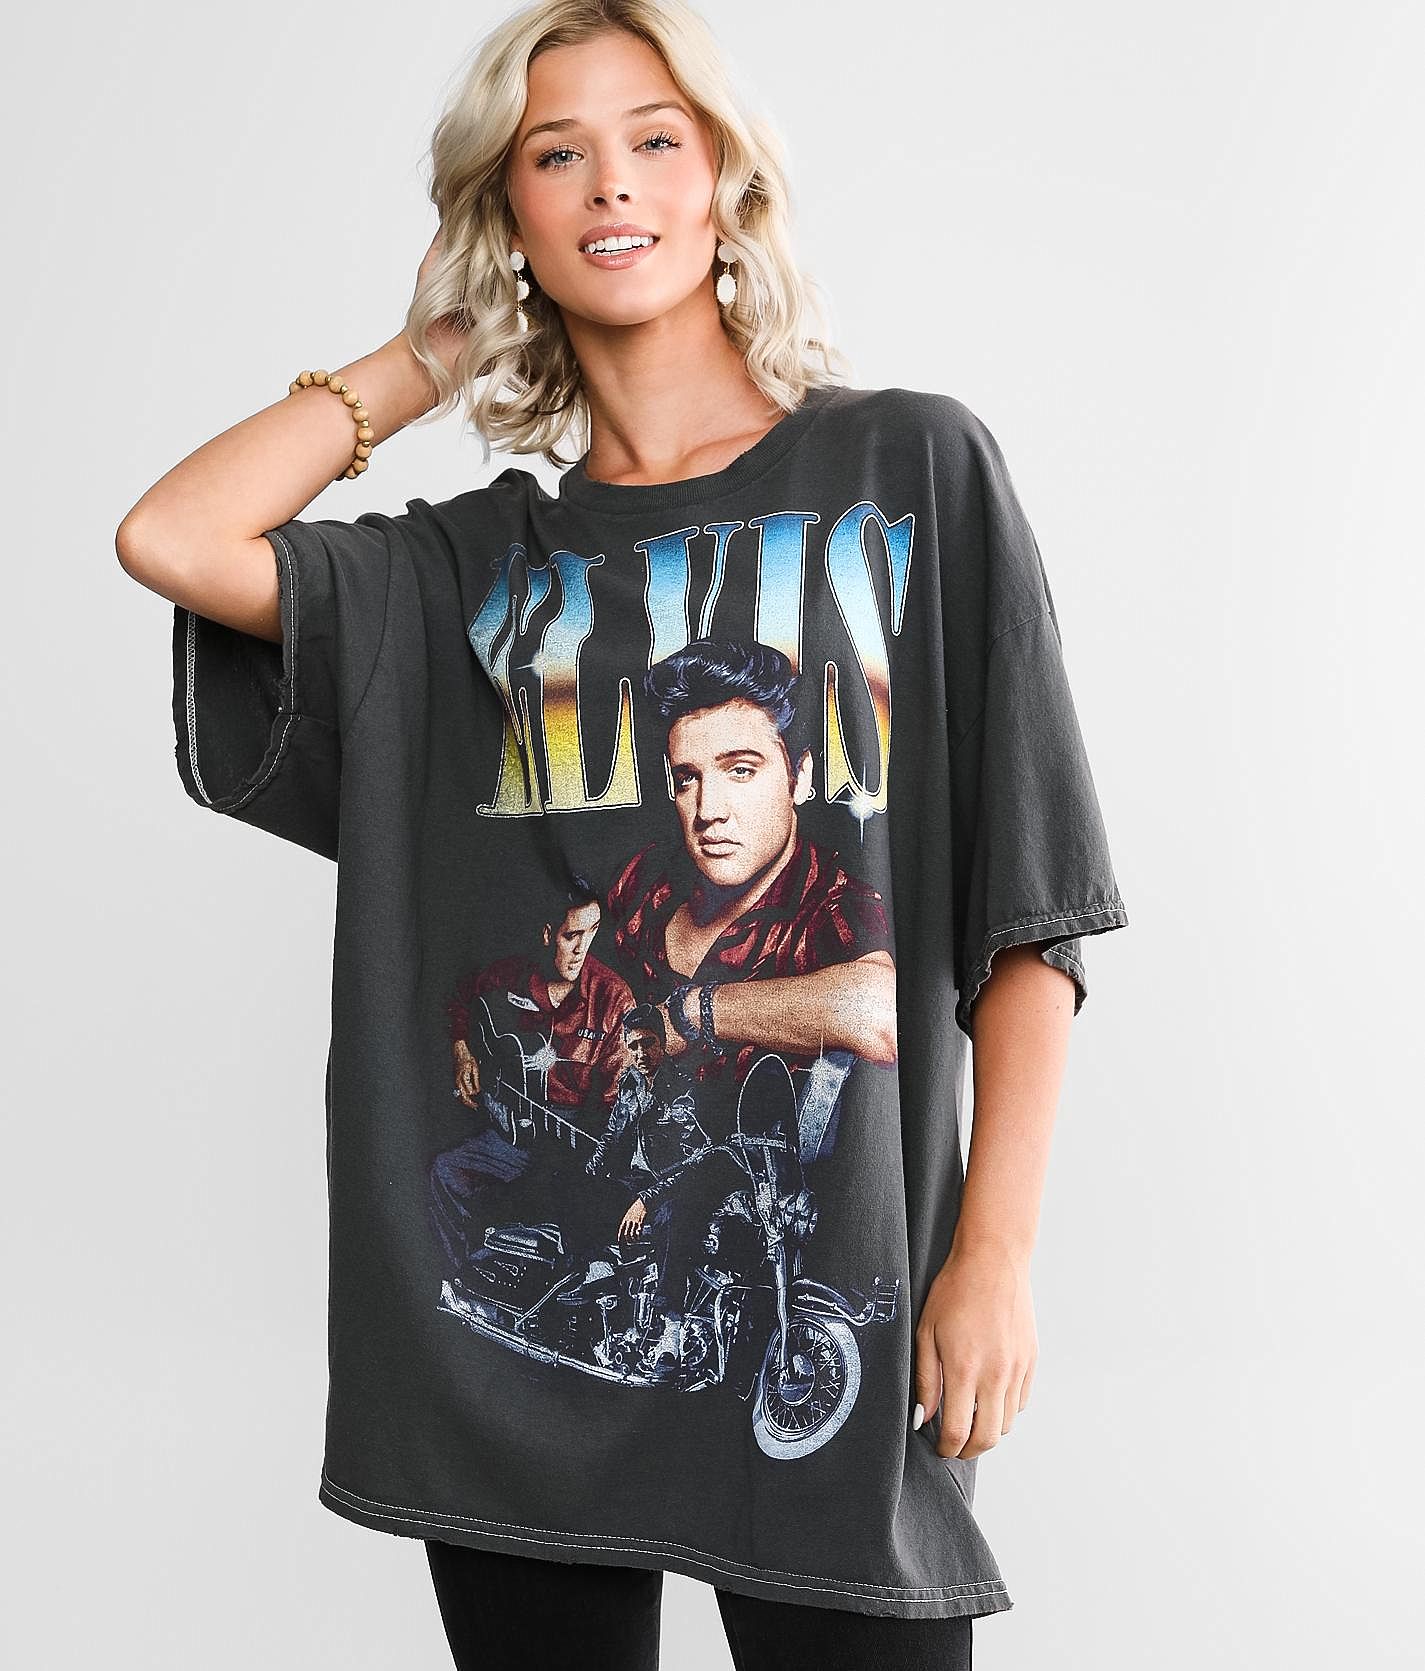 exegese Onschuld Gezag Elvis Presley Band Motorcycle T-Shirt - One Size - Women's T-Shirts in  Washed Black | Buckle